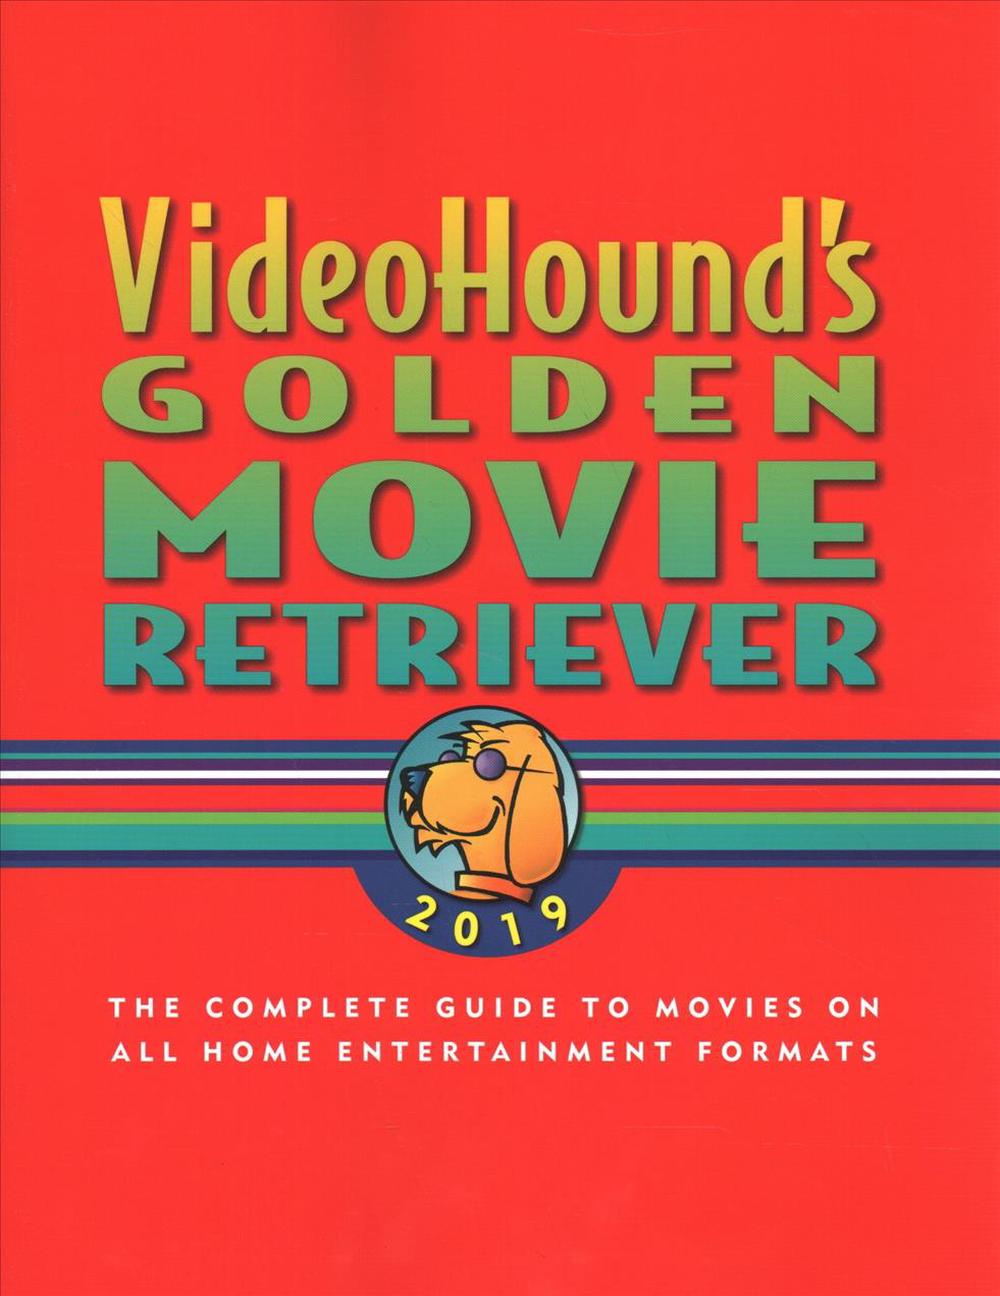 Videohound's Golden Movie Retriever 2019 The Complete Guide to Movies